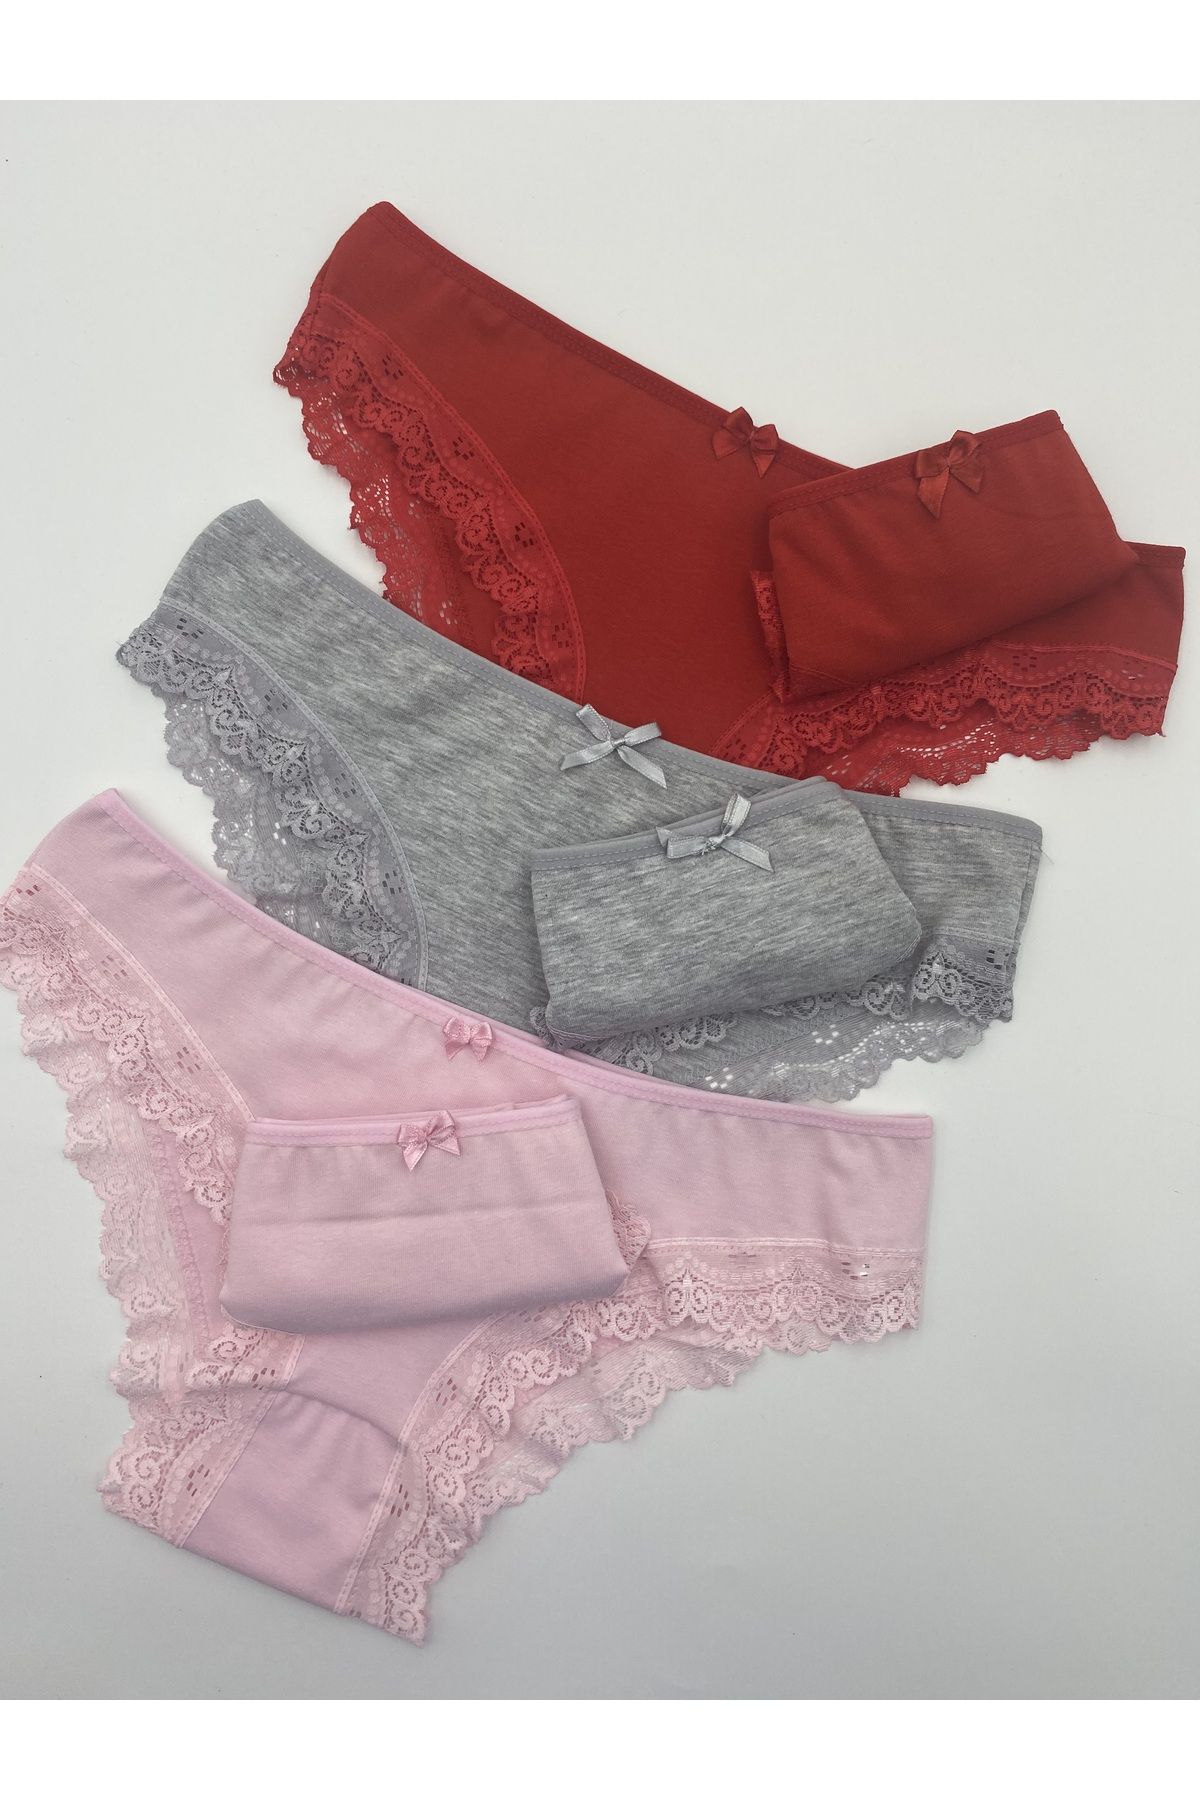 DONLİZZA Lace Pink Panties Gray, Red 3 pieces - Trendyol